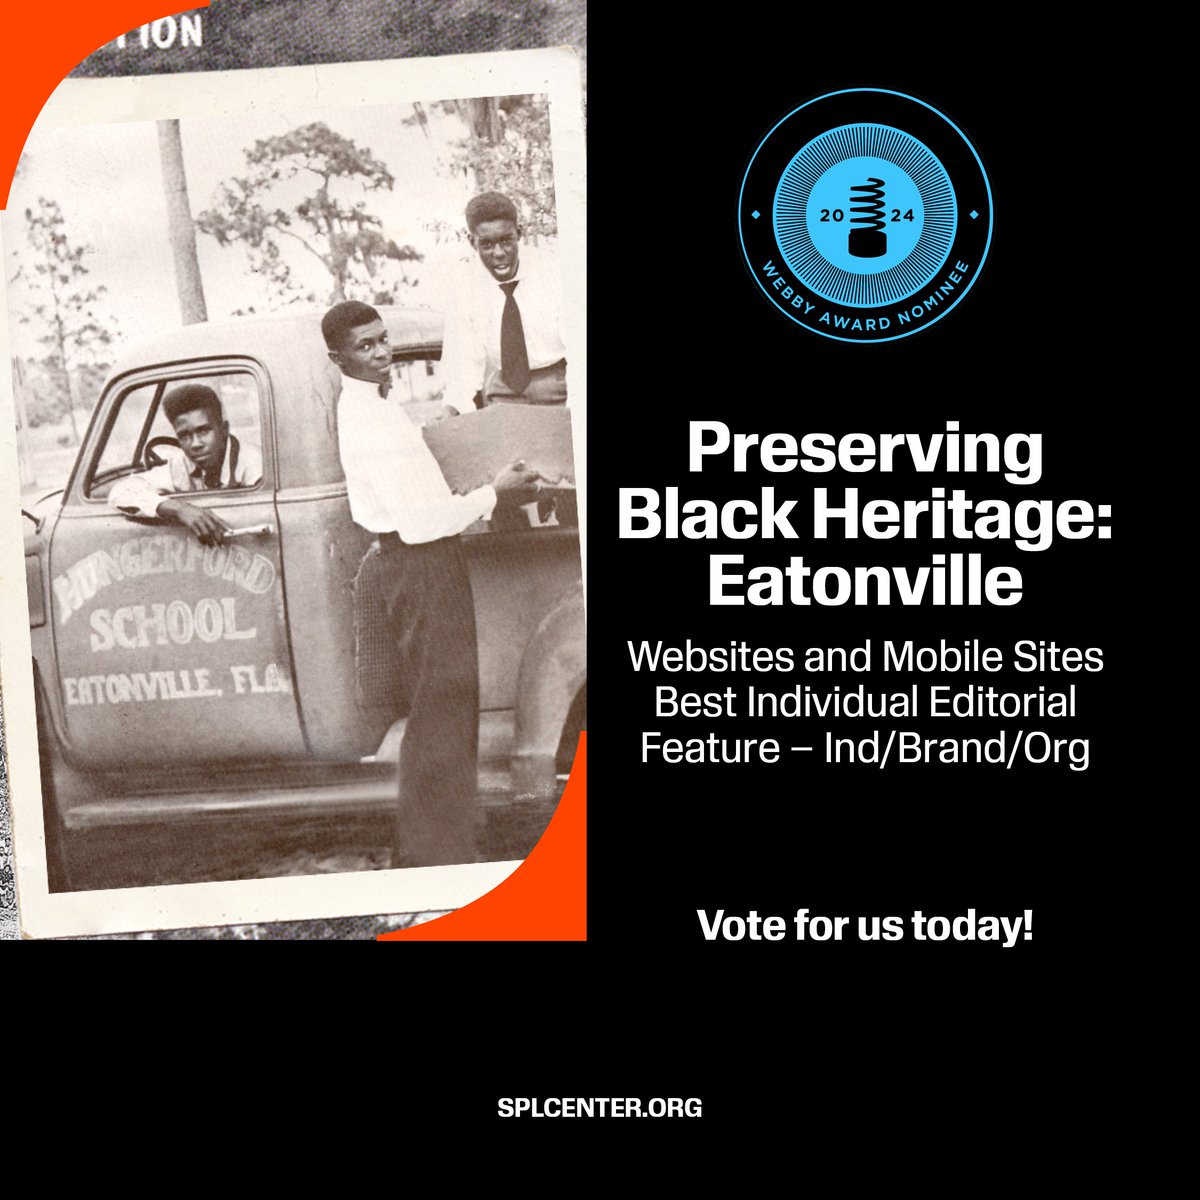 🌟 We’re thrilled to announce that the SPLC has been nominated for @TheWebbyAwards! Our incredible story, Preserving Black Heritage: Eatonville, is up for a People’s Voice Award. 🗳️ Cast your vote by April 18: wbby.co/40293N #Webbys